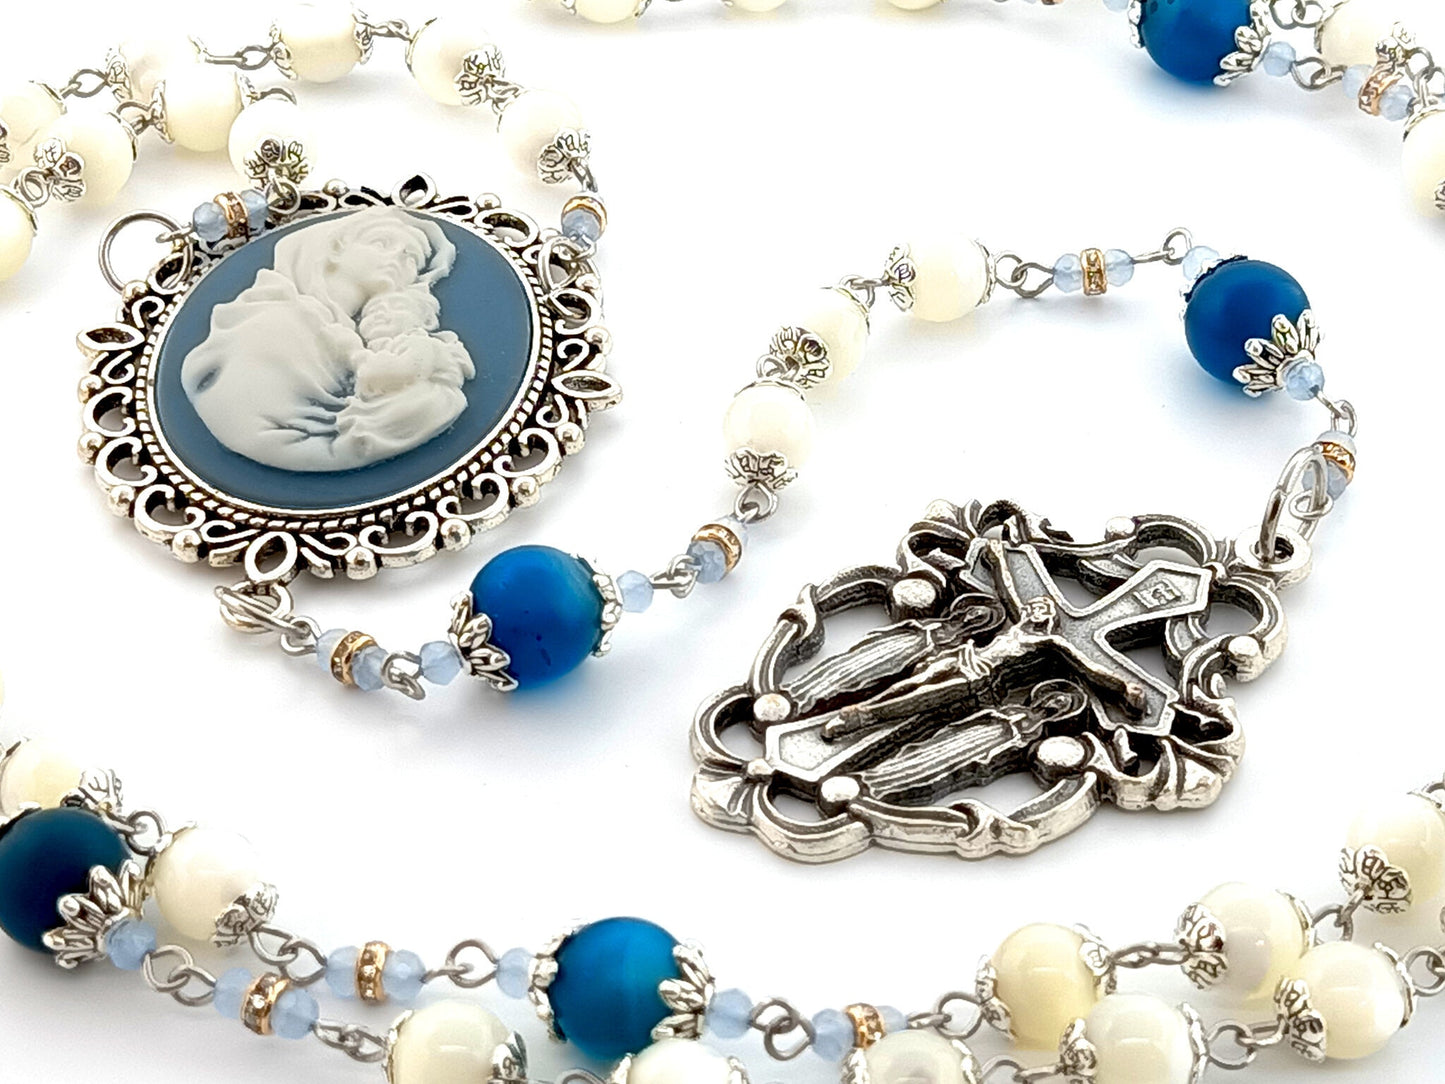 Virgin Mary cameo unique rosary beads with mother of pearl and agate rosary beads with Holy Angel crucifix.